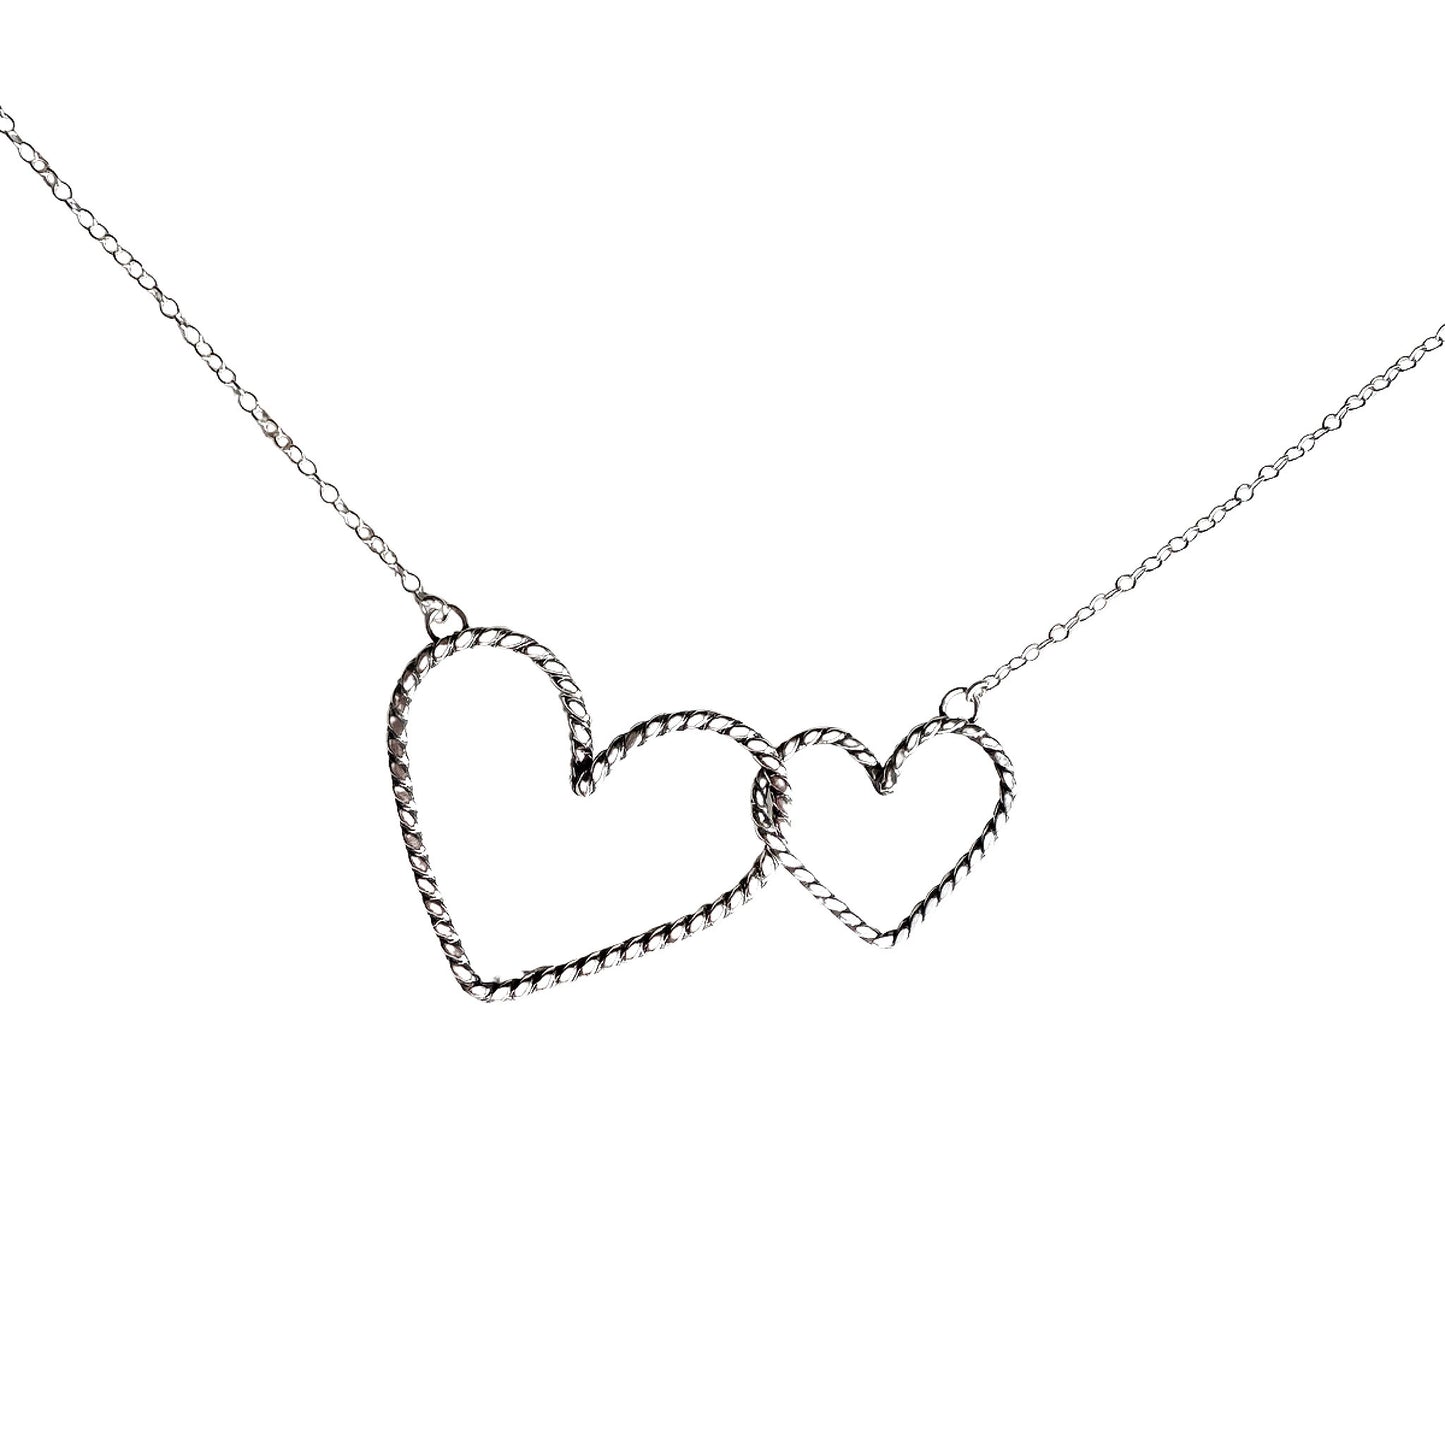 Silver Interlocking Hearts Necklace with rope wire design one larger and one smaller heart intertwined 